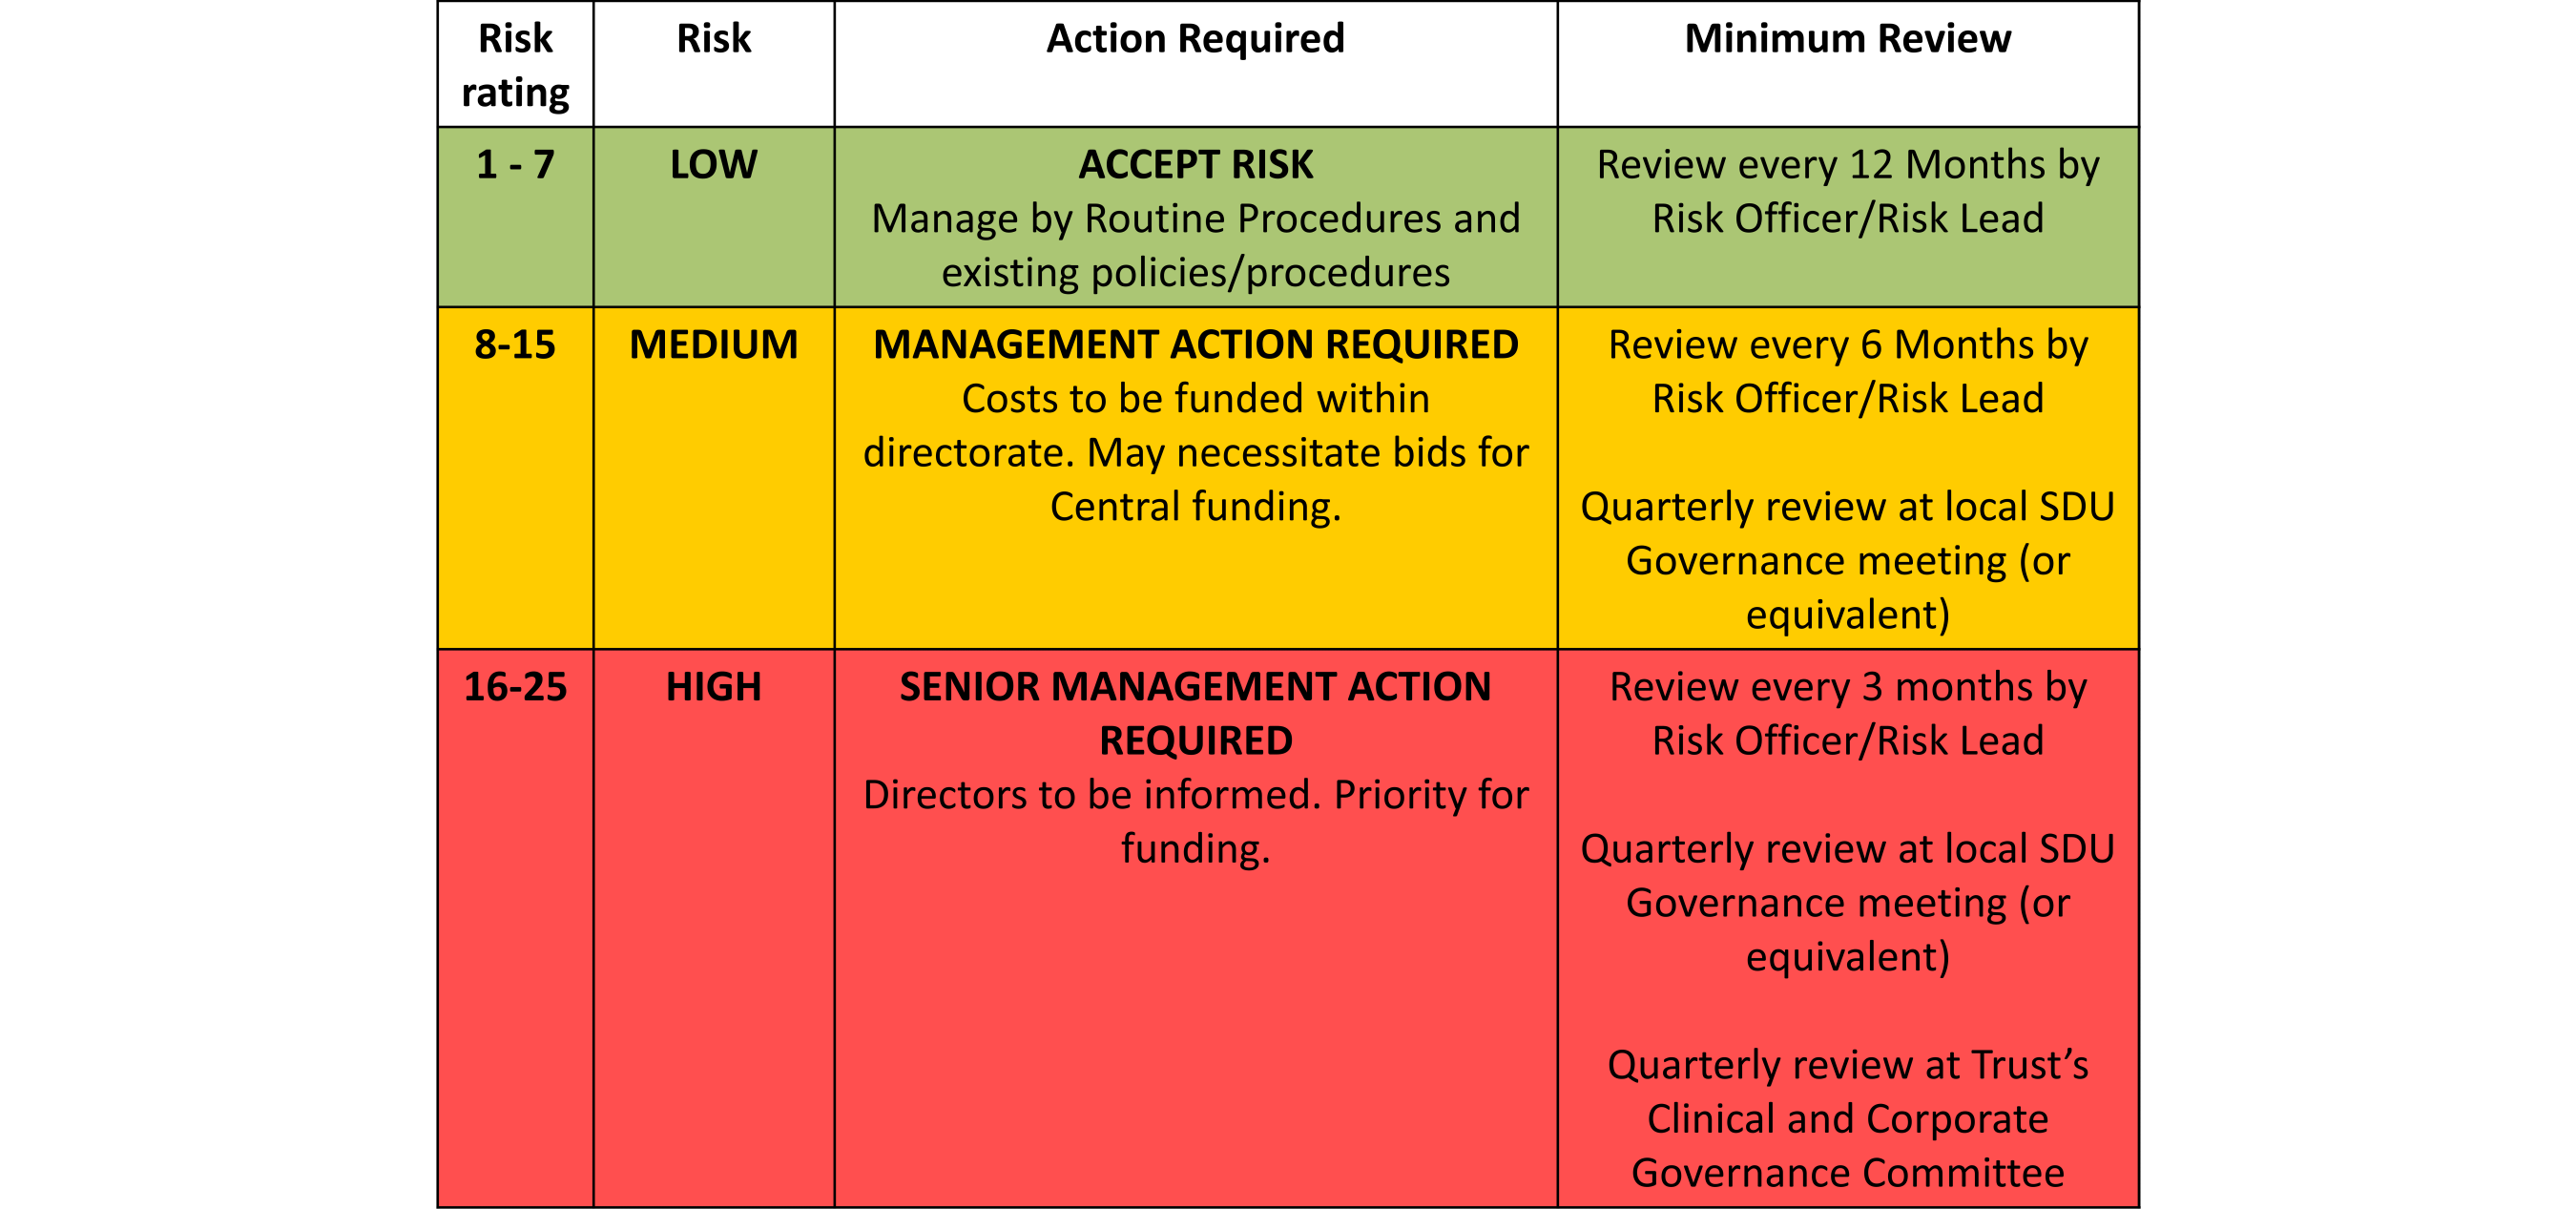 In this example, a risk of 1 to 7 is a low risk (green) that can be accepted. 8 to 15 is a moderate risk (orange), requiring management action. 16 to 25 is a high risk (red), requiring senior management action. Some more specific actions for each band are also specified.